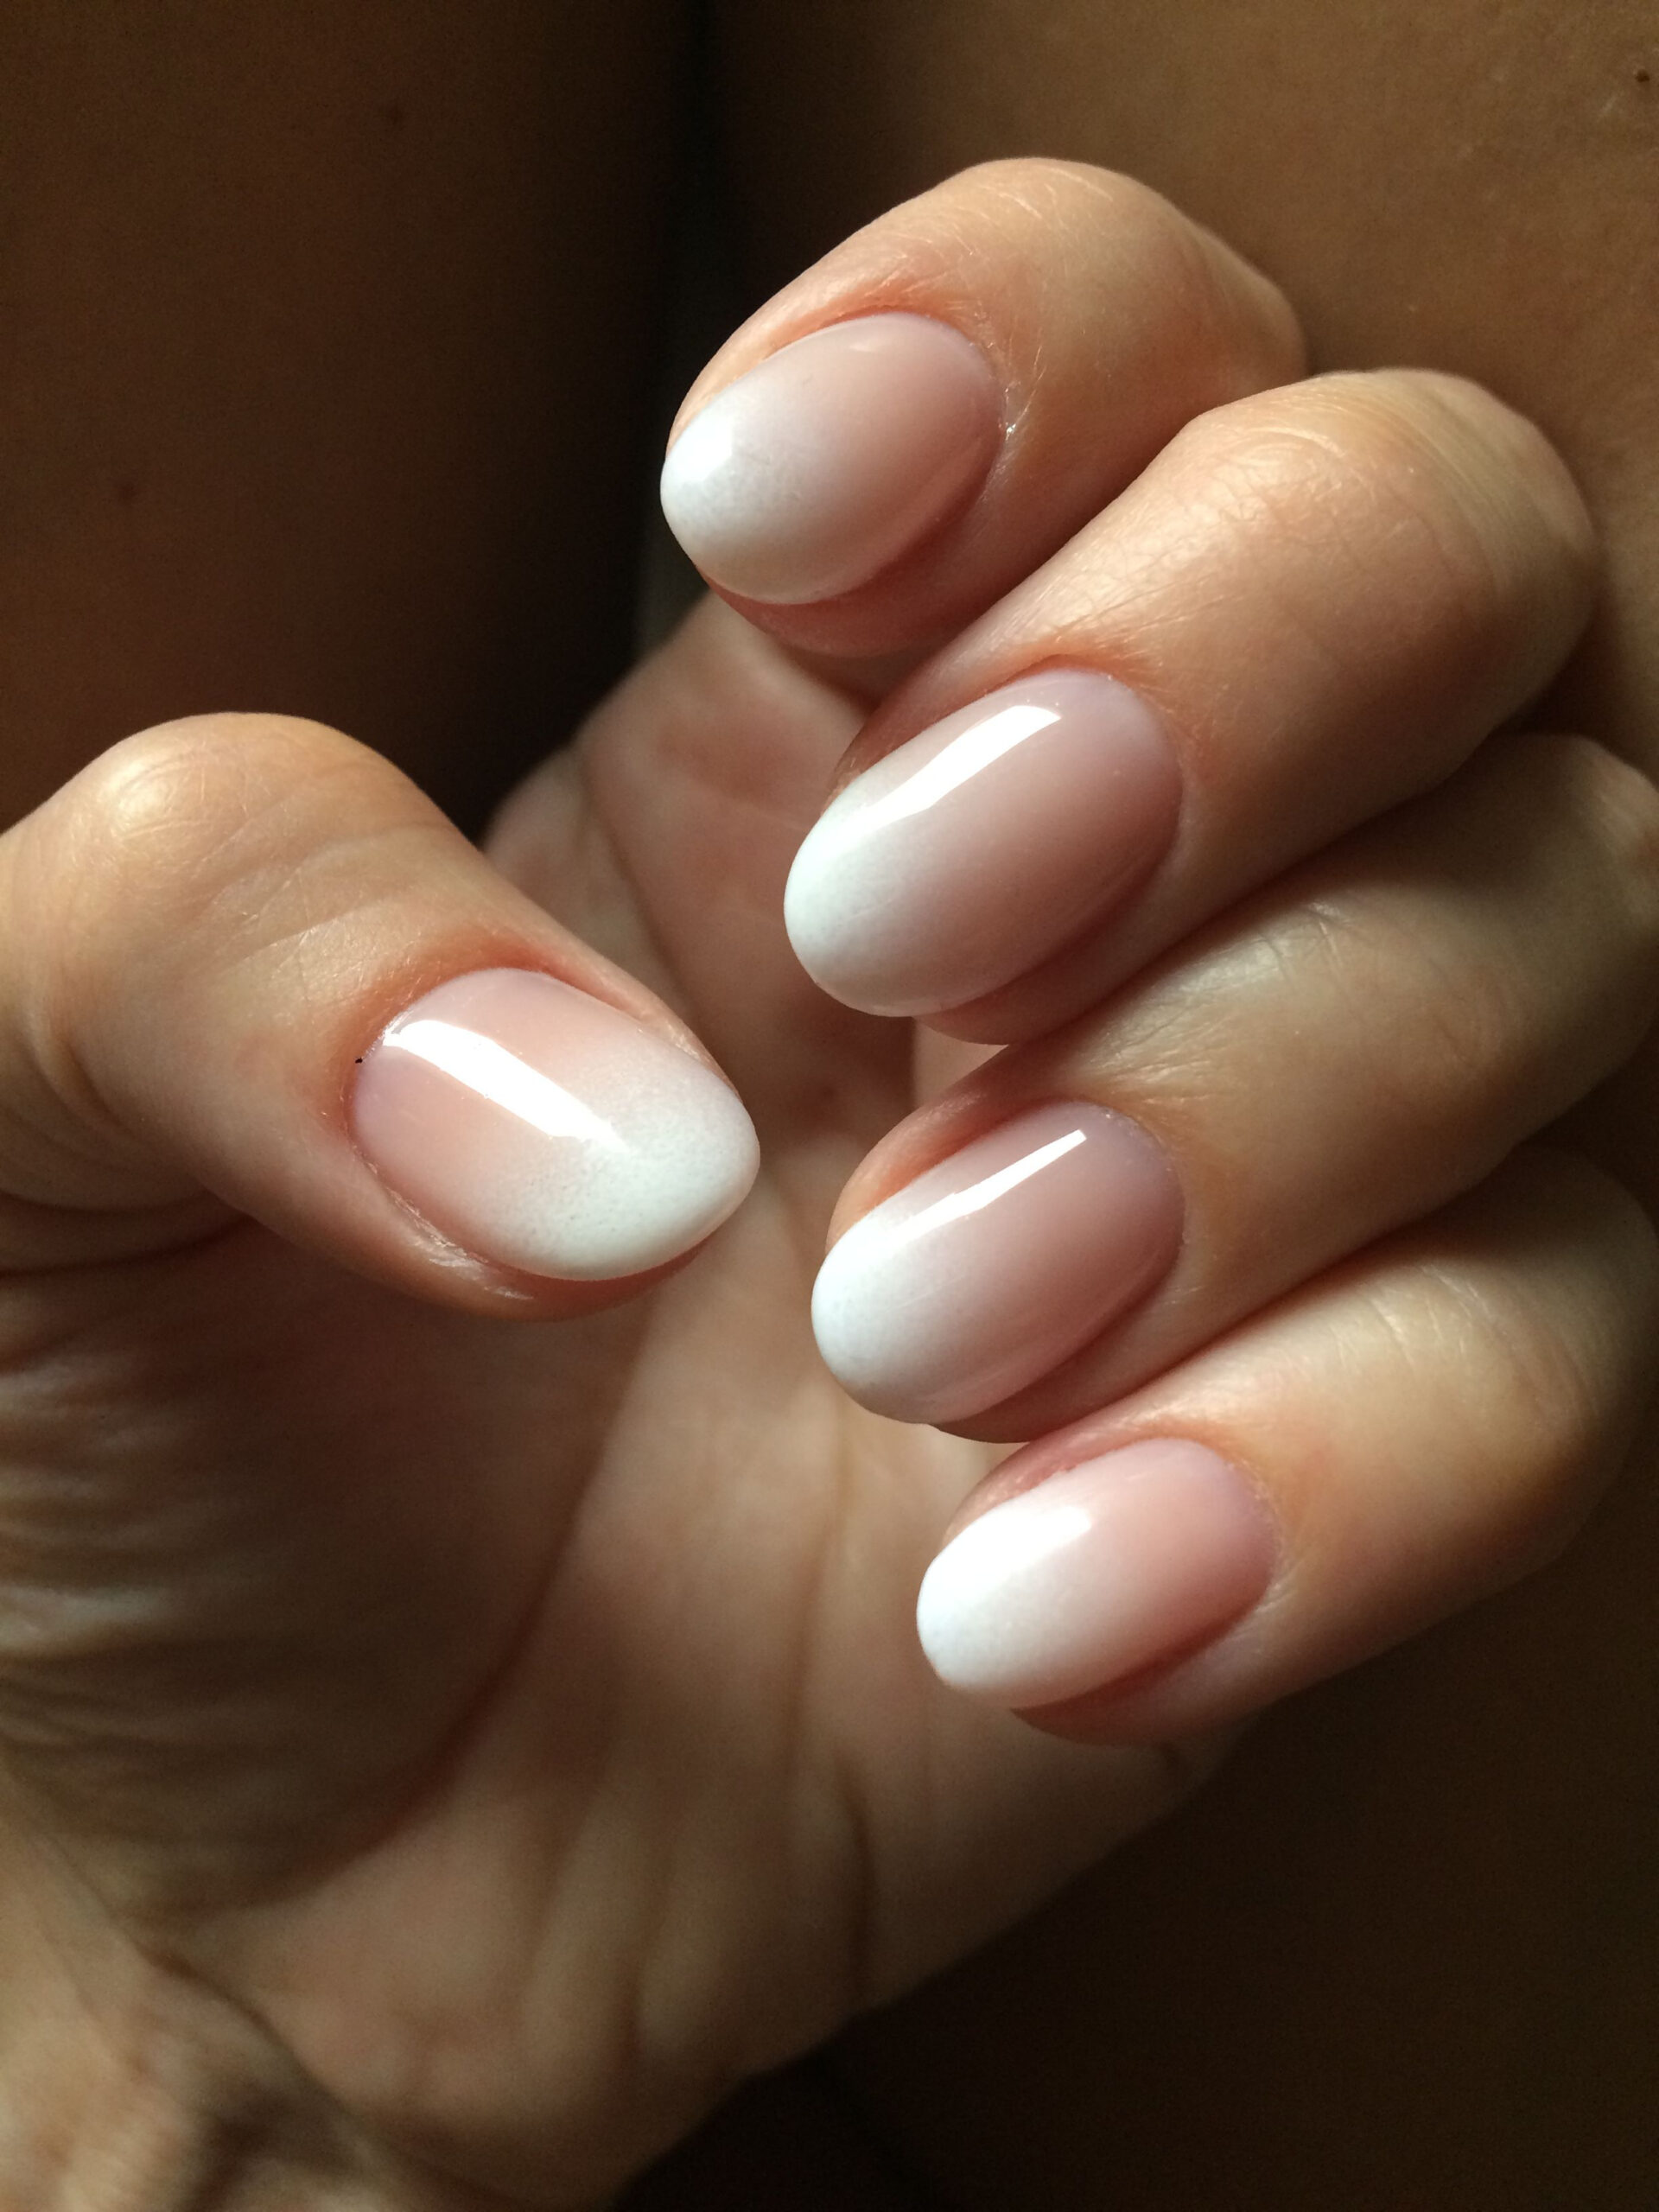 Baby Boomer Nails Round Nails, Oval Nails, Ombre Nails, Metallic Nails dedans Ongles Baby Boomer Couleur